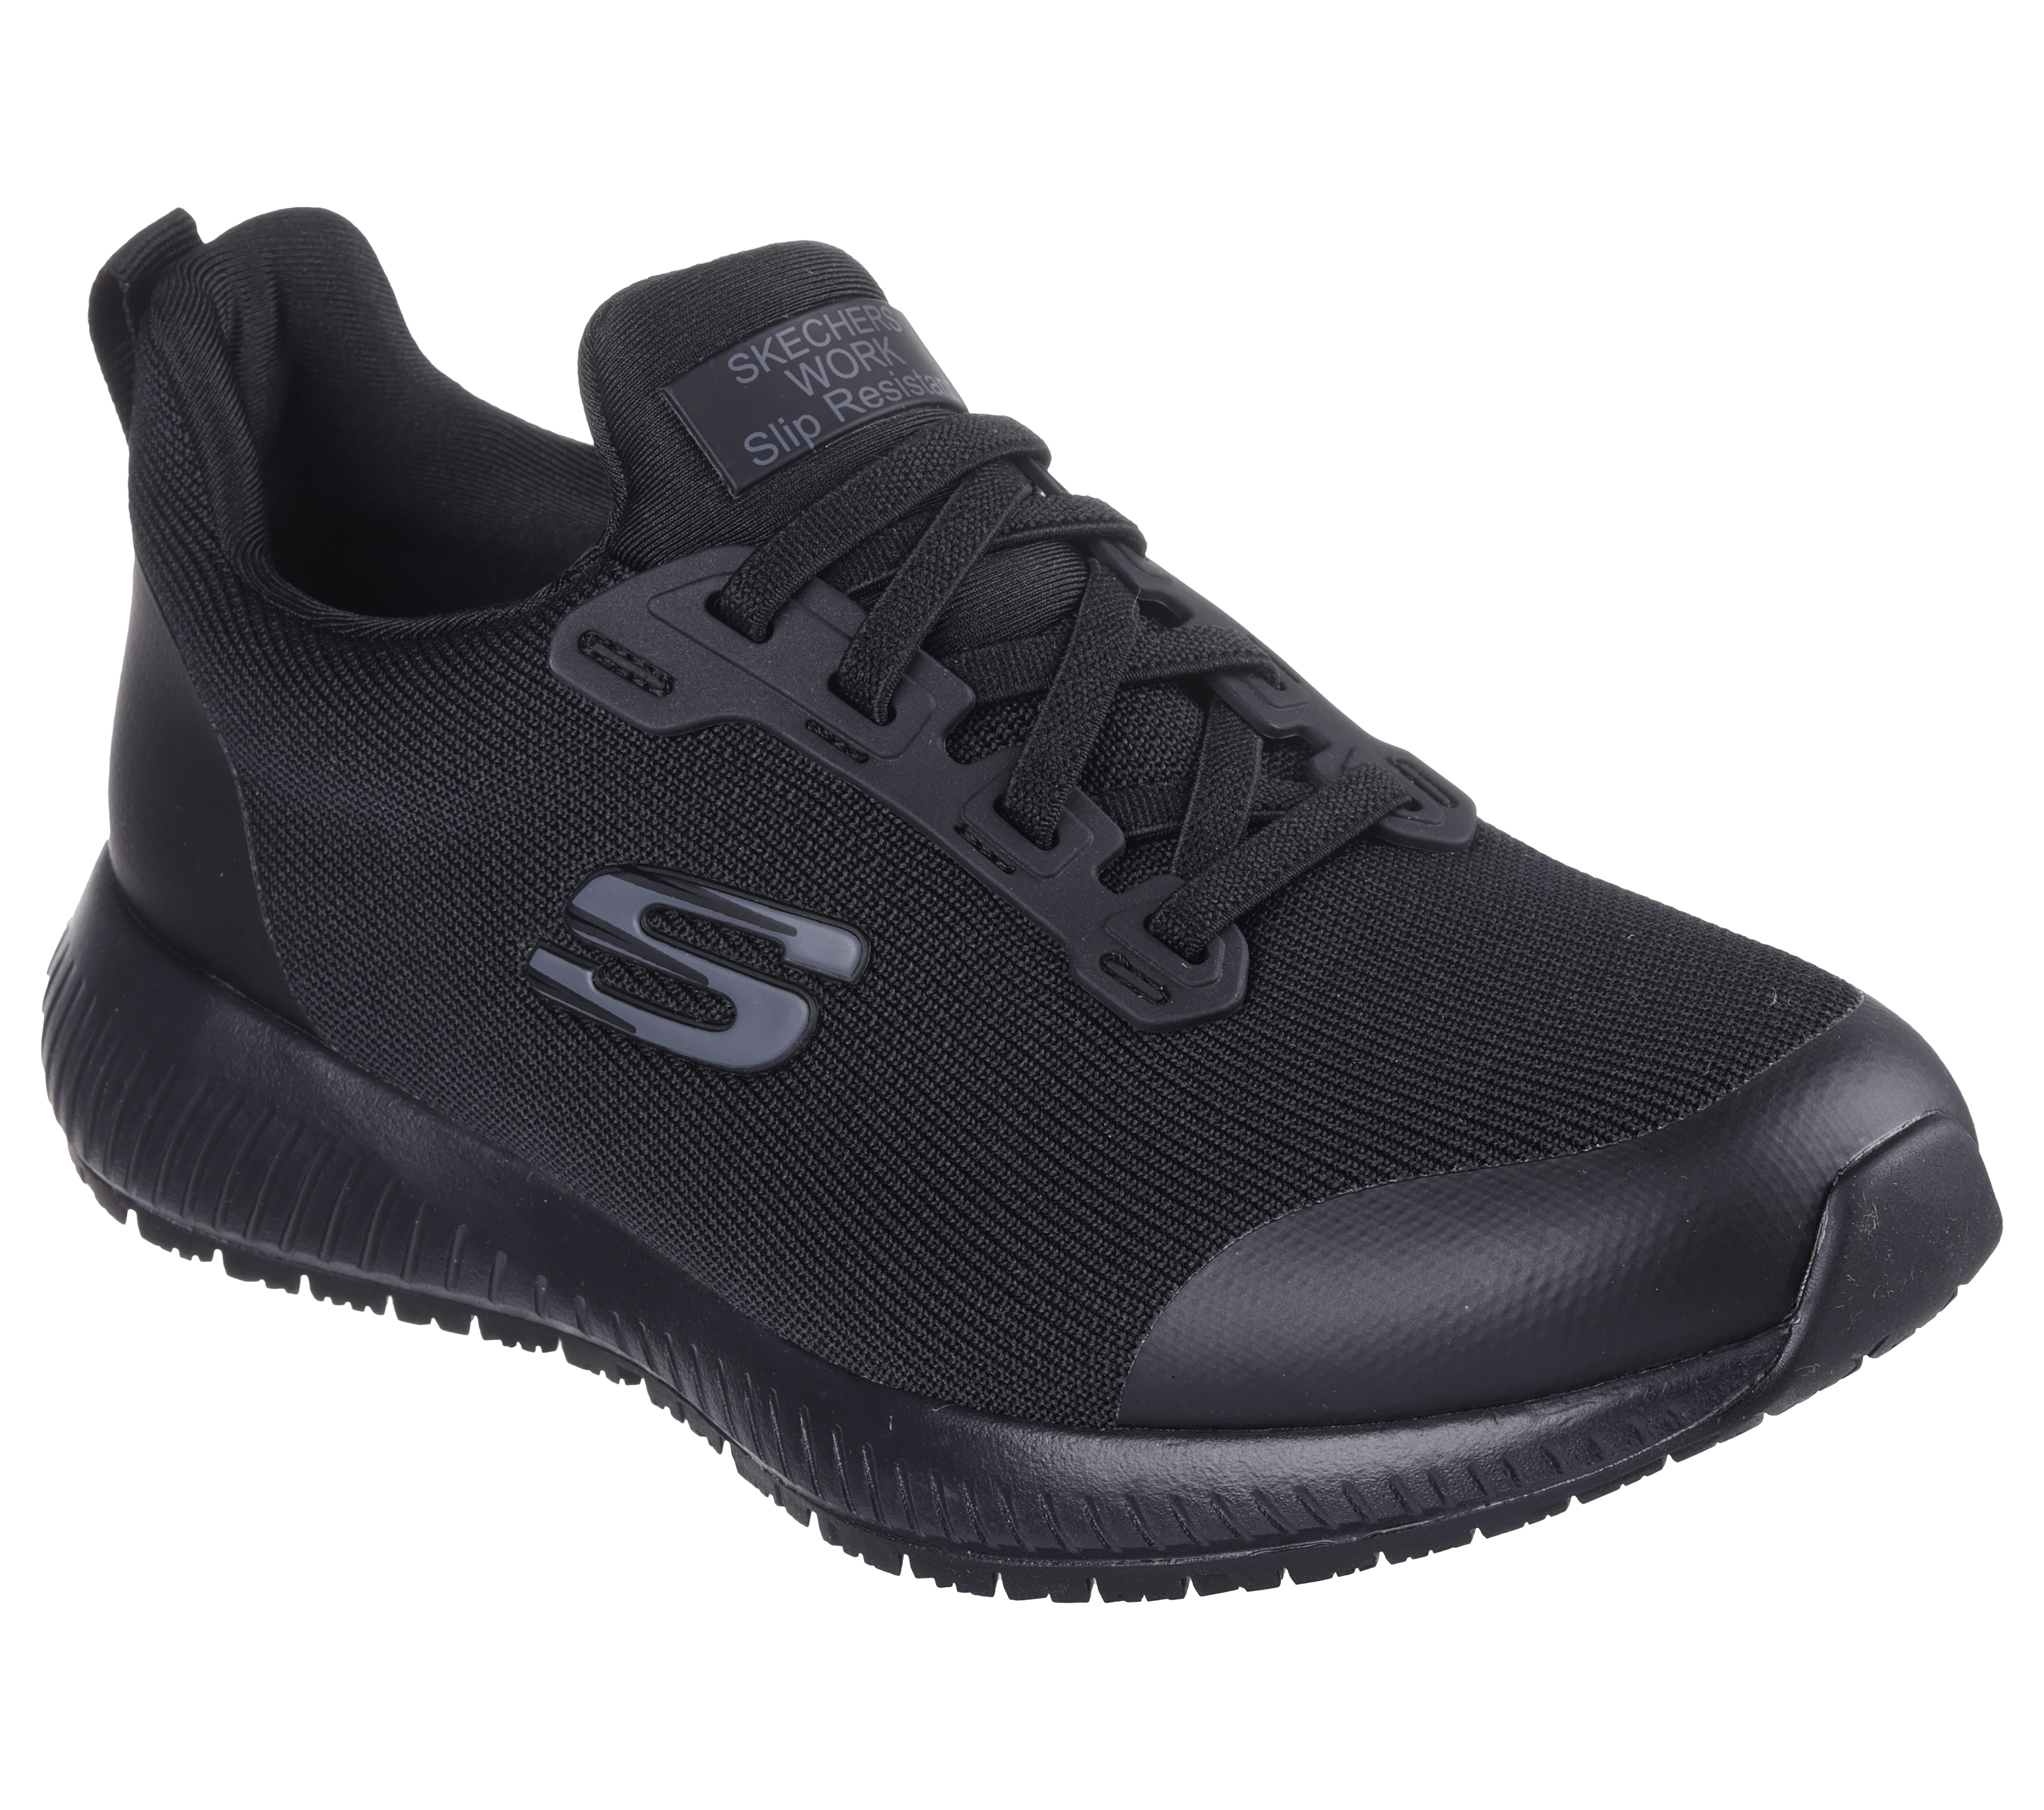 SHOE SHOW - #Skechers style you can sport every day